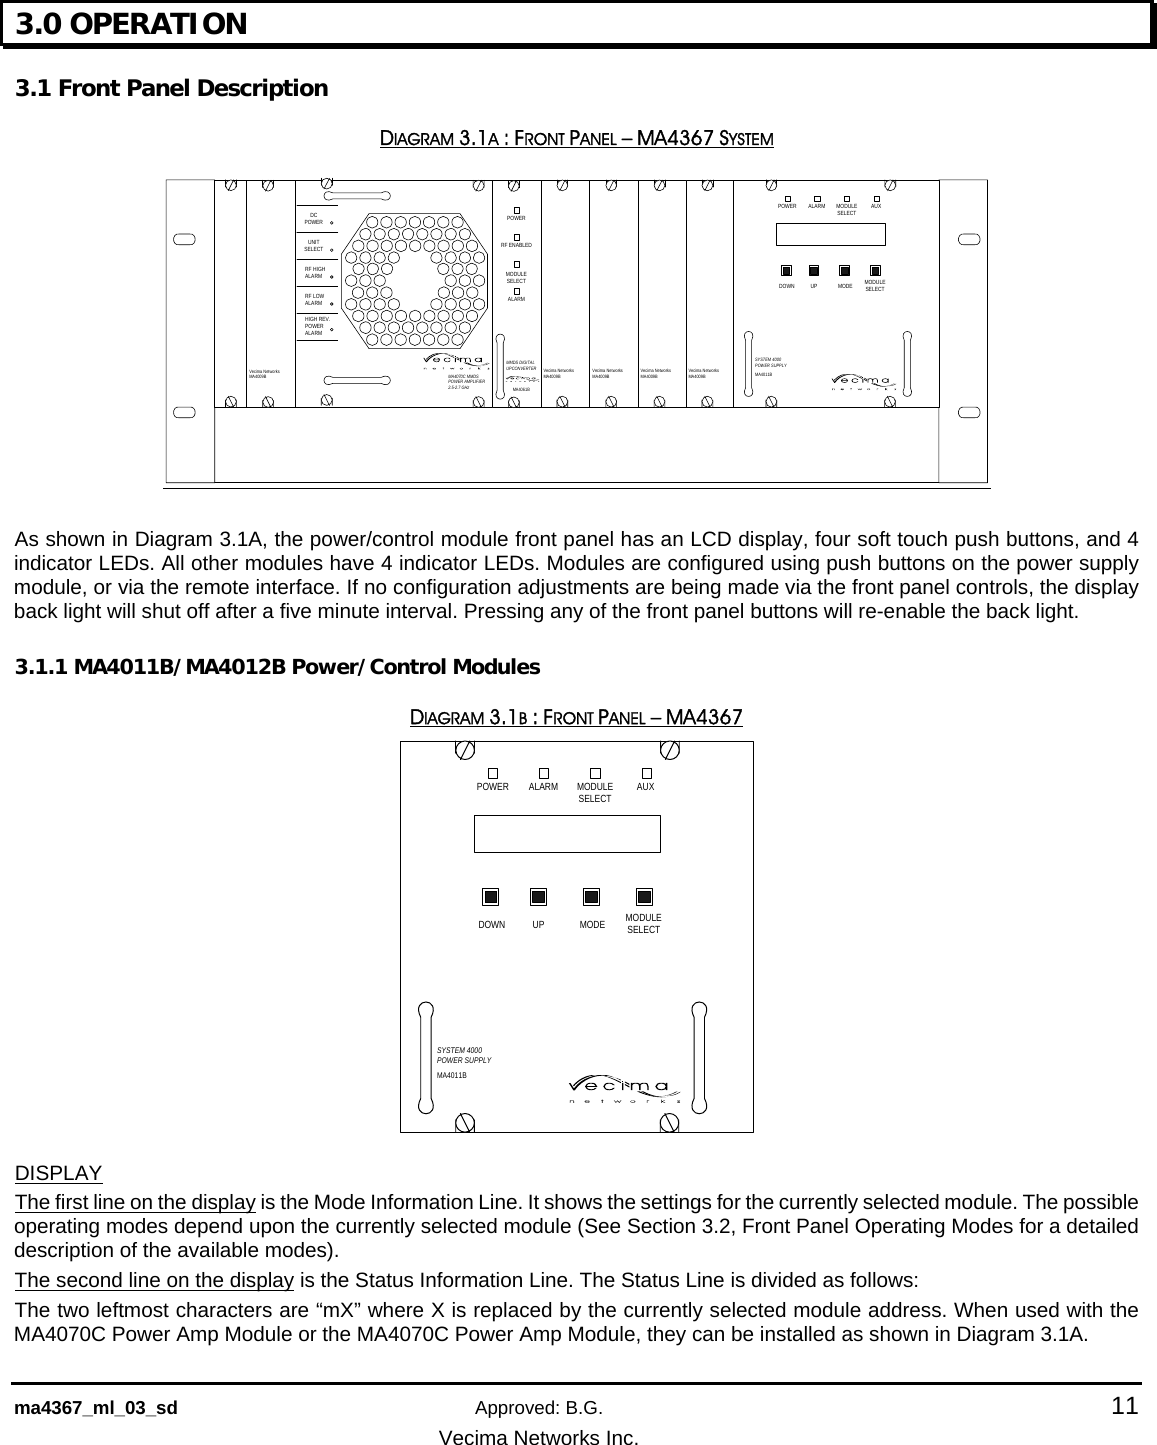    ma4367_ml_03_sd Approved: B.G.  11   Vecima Networks Inc. 3.0 OPERATION  3.1 Front Panel Description DIAGRAM 3.1A : FRONT PANEL – MA4367 SYSTEM Vecima Networ ksMA4009BPOWER ALARM MODULESELECT AUXSYSTEM 4000POWER SUPPLYMA4011BDOWN UP MODE MODULESELECTVecima Networ ksMA4009BVecima NetworksMA4009BVecima NetworksMA4009BVecima NetworksMA4009BMA4070C MMDS POWER AMPLIFIER2.5-2.7 GHzDCPOWERRF HIGHALARMRF LOWALARMHIGH REV.POWERALARMUNITSELECTPOWERMODULESELECTALARMRF ENABLEDMA4061BMMDS DIGITALUPCONVERTER  As shown in Diagram 3.1A, the power/control module front panel has an LCD display, four soft touch push buttons, and 4 indicator LEDs. All other modules have 4 indicator LEDs. Modules are configured using push buttons on the power supply module, or via the remote interface. If no configuration adjustments are being made via the front panel controls, the display back light will shut off after a five minute interval. Pressing any of the front panel buttons will re-enable the back light. 3.1.1 MA4011B/MA4012B Power/Control Modules DIAGRAM 3.1B : FRONT PANEL – MA4367 POWER ALARM MODULESELECT AUXSYSTEM 4000POWER SUPPLYMA4011BDOWN UP MODE MODULESELECT DISPLAY The first line on the display is the Mode Information Line. It shows the settings for the currently selected module. The possible operating modes depend upon the currently selected module (See Section 3.2, Front Panel Operating Modes for a detailed description of the available modes). The second line on the display is the Status Information Line. The Status Line is divided as follows: The two leftmost characters are “mX” where X is replaced by the currently selected module address. When used with the MA4070C Power Amp Module or the MA4070C Power Amp Module, they can be installed as shown in Diagram 3.1A. 